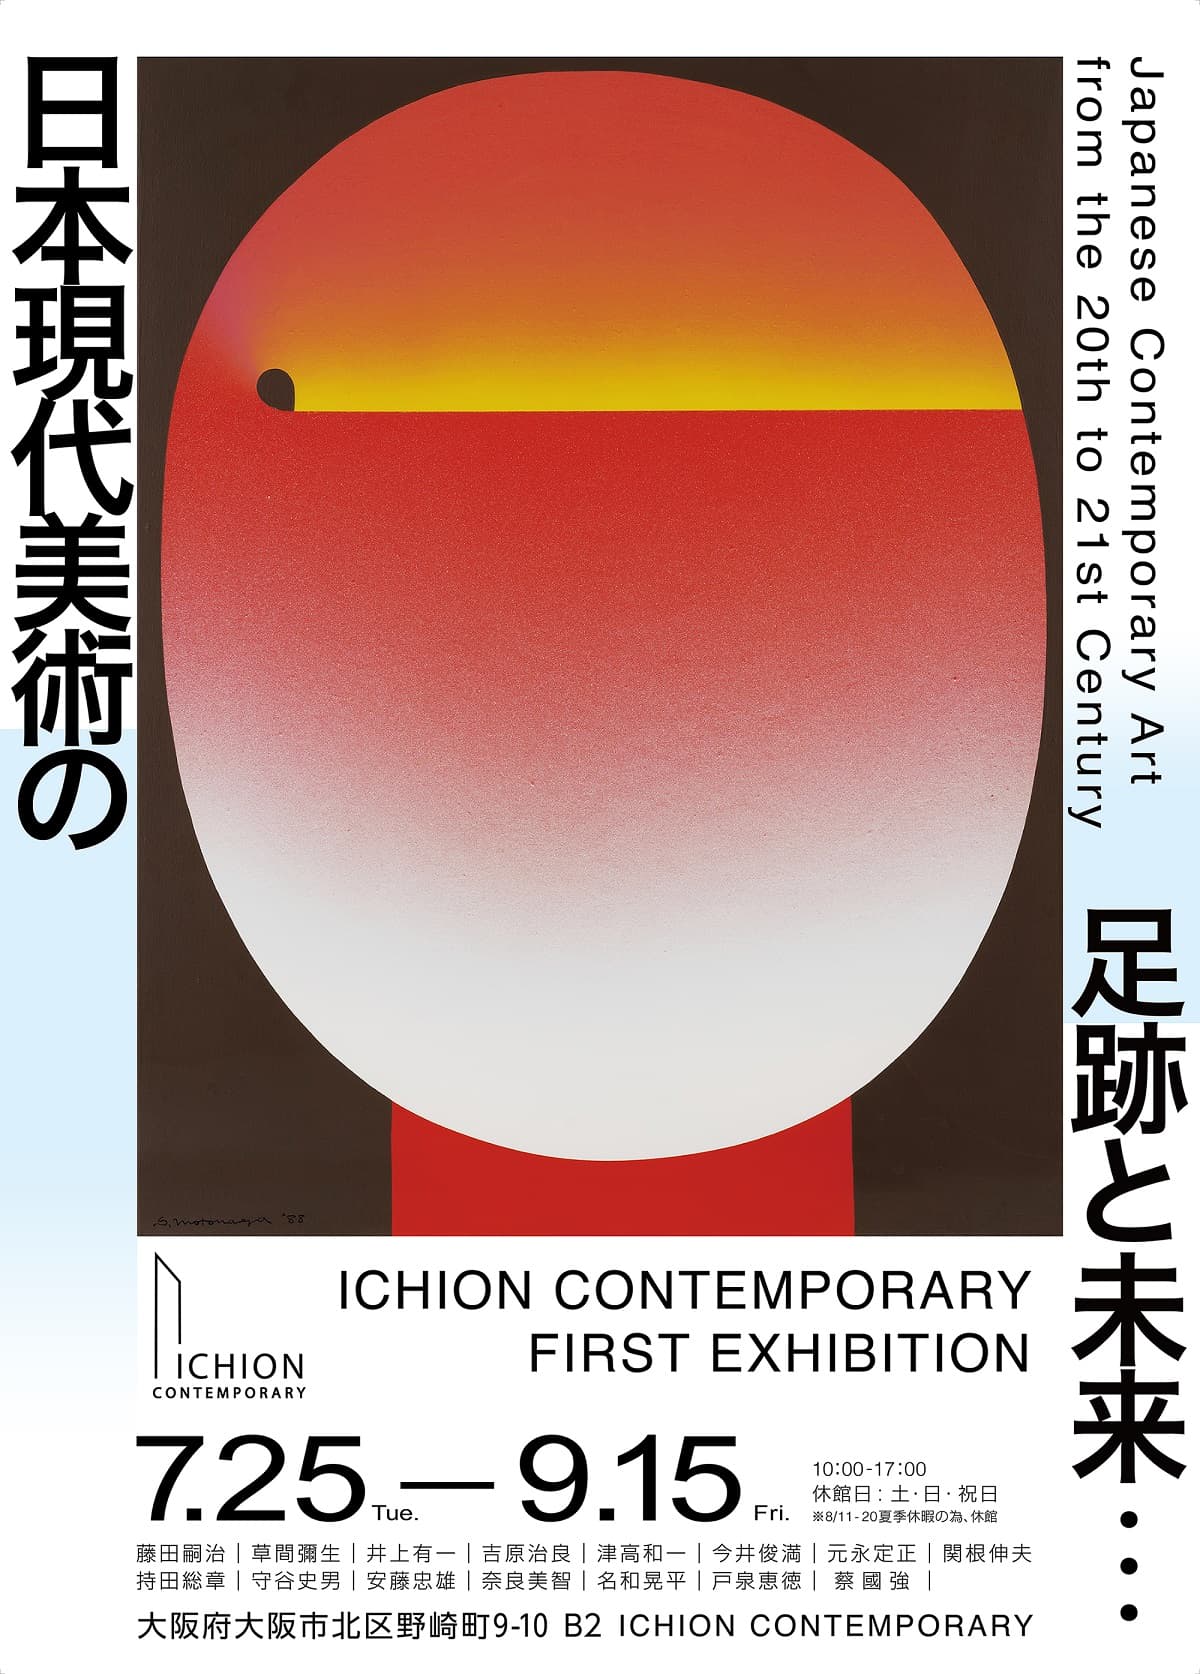 Japanese Contemporary Art from the 20th to 21st Century / 日本現代 